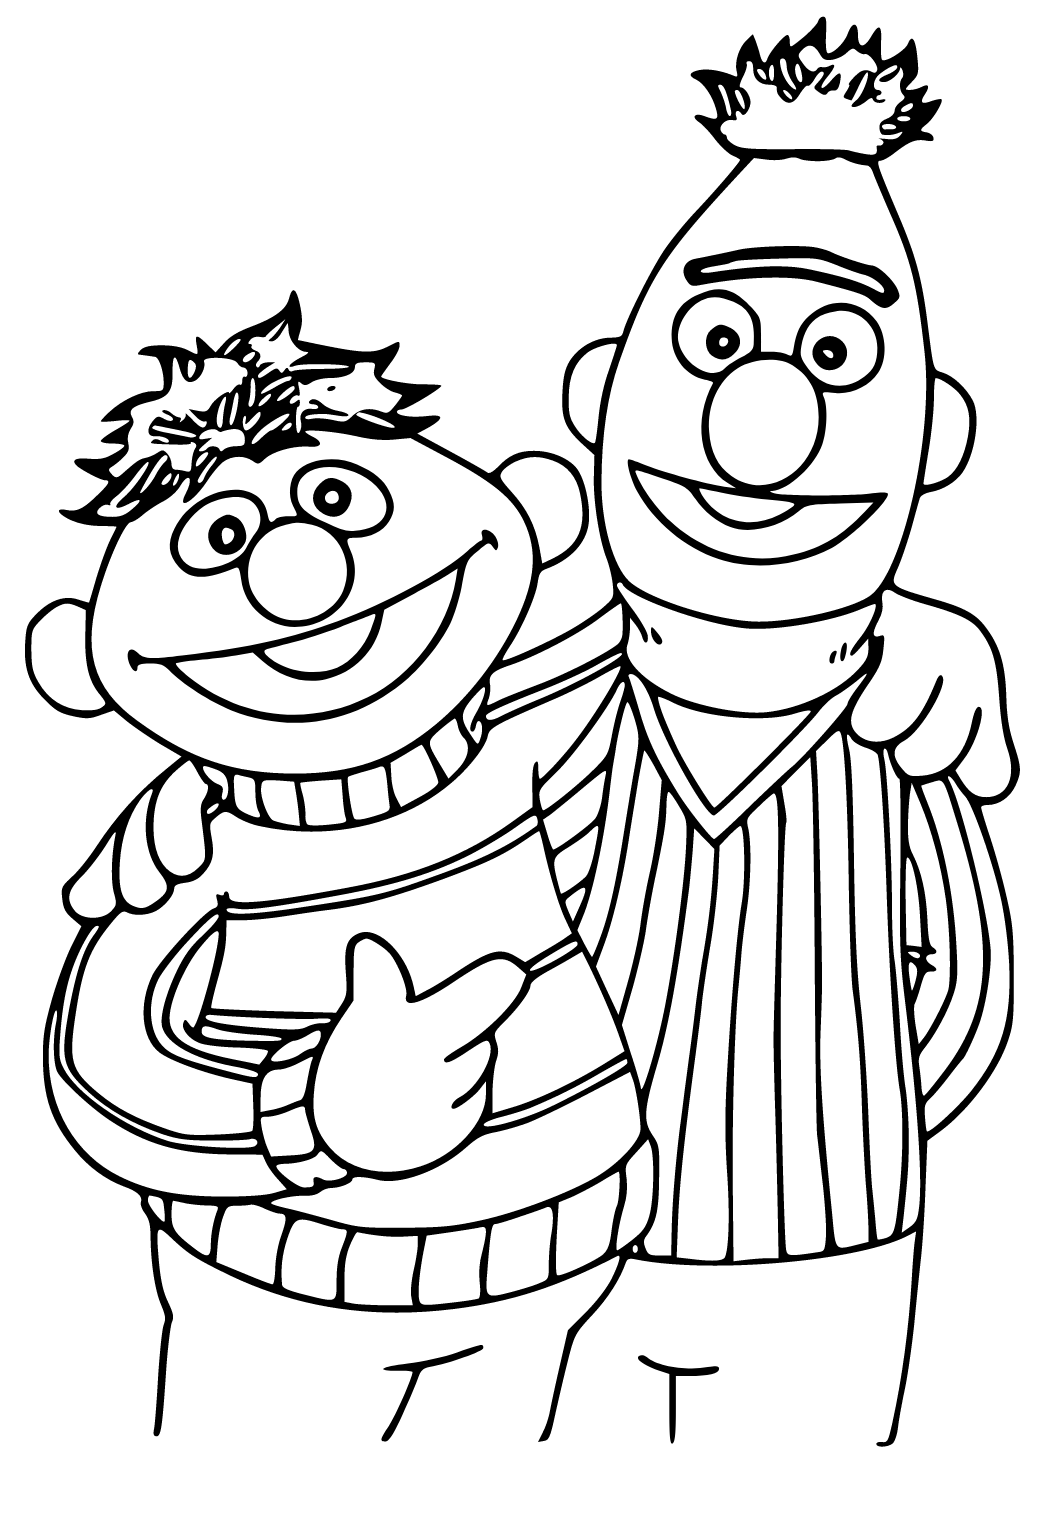 Free printable sesame street friends coloring page for adults and kids